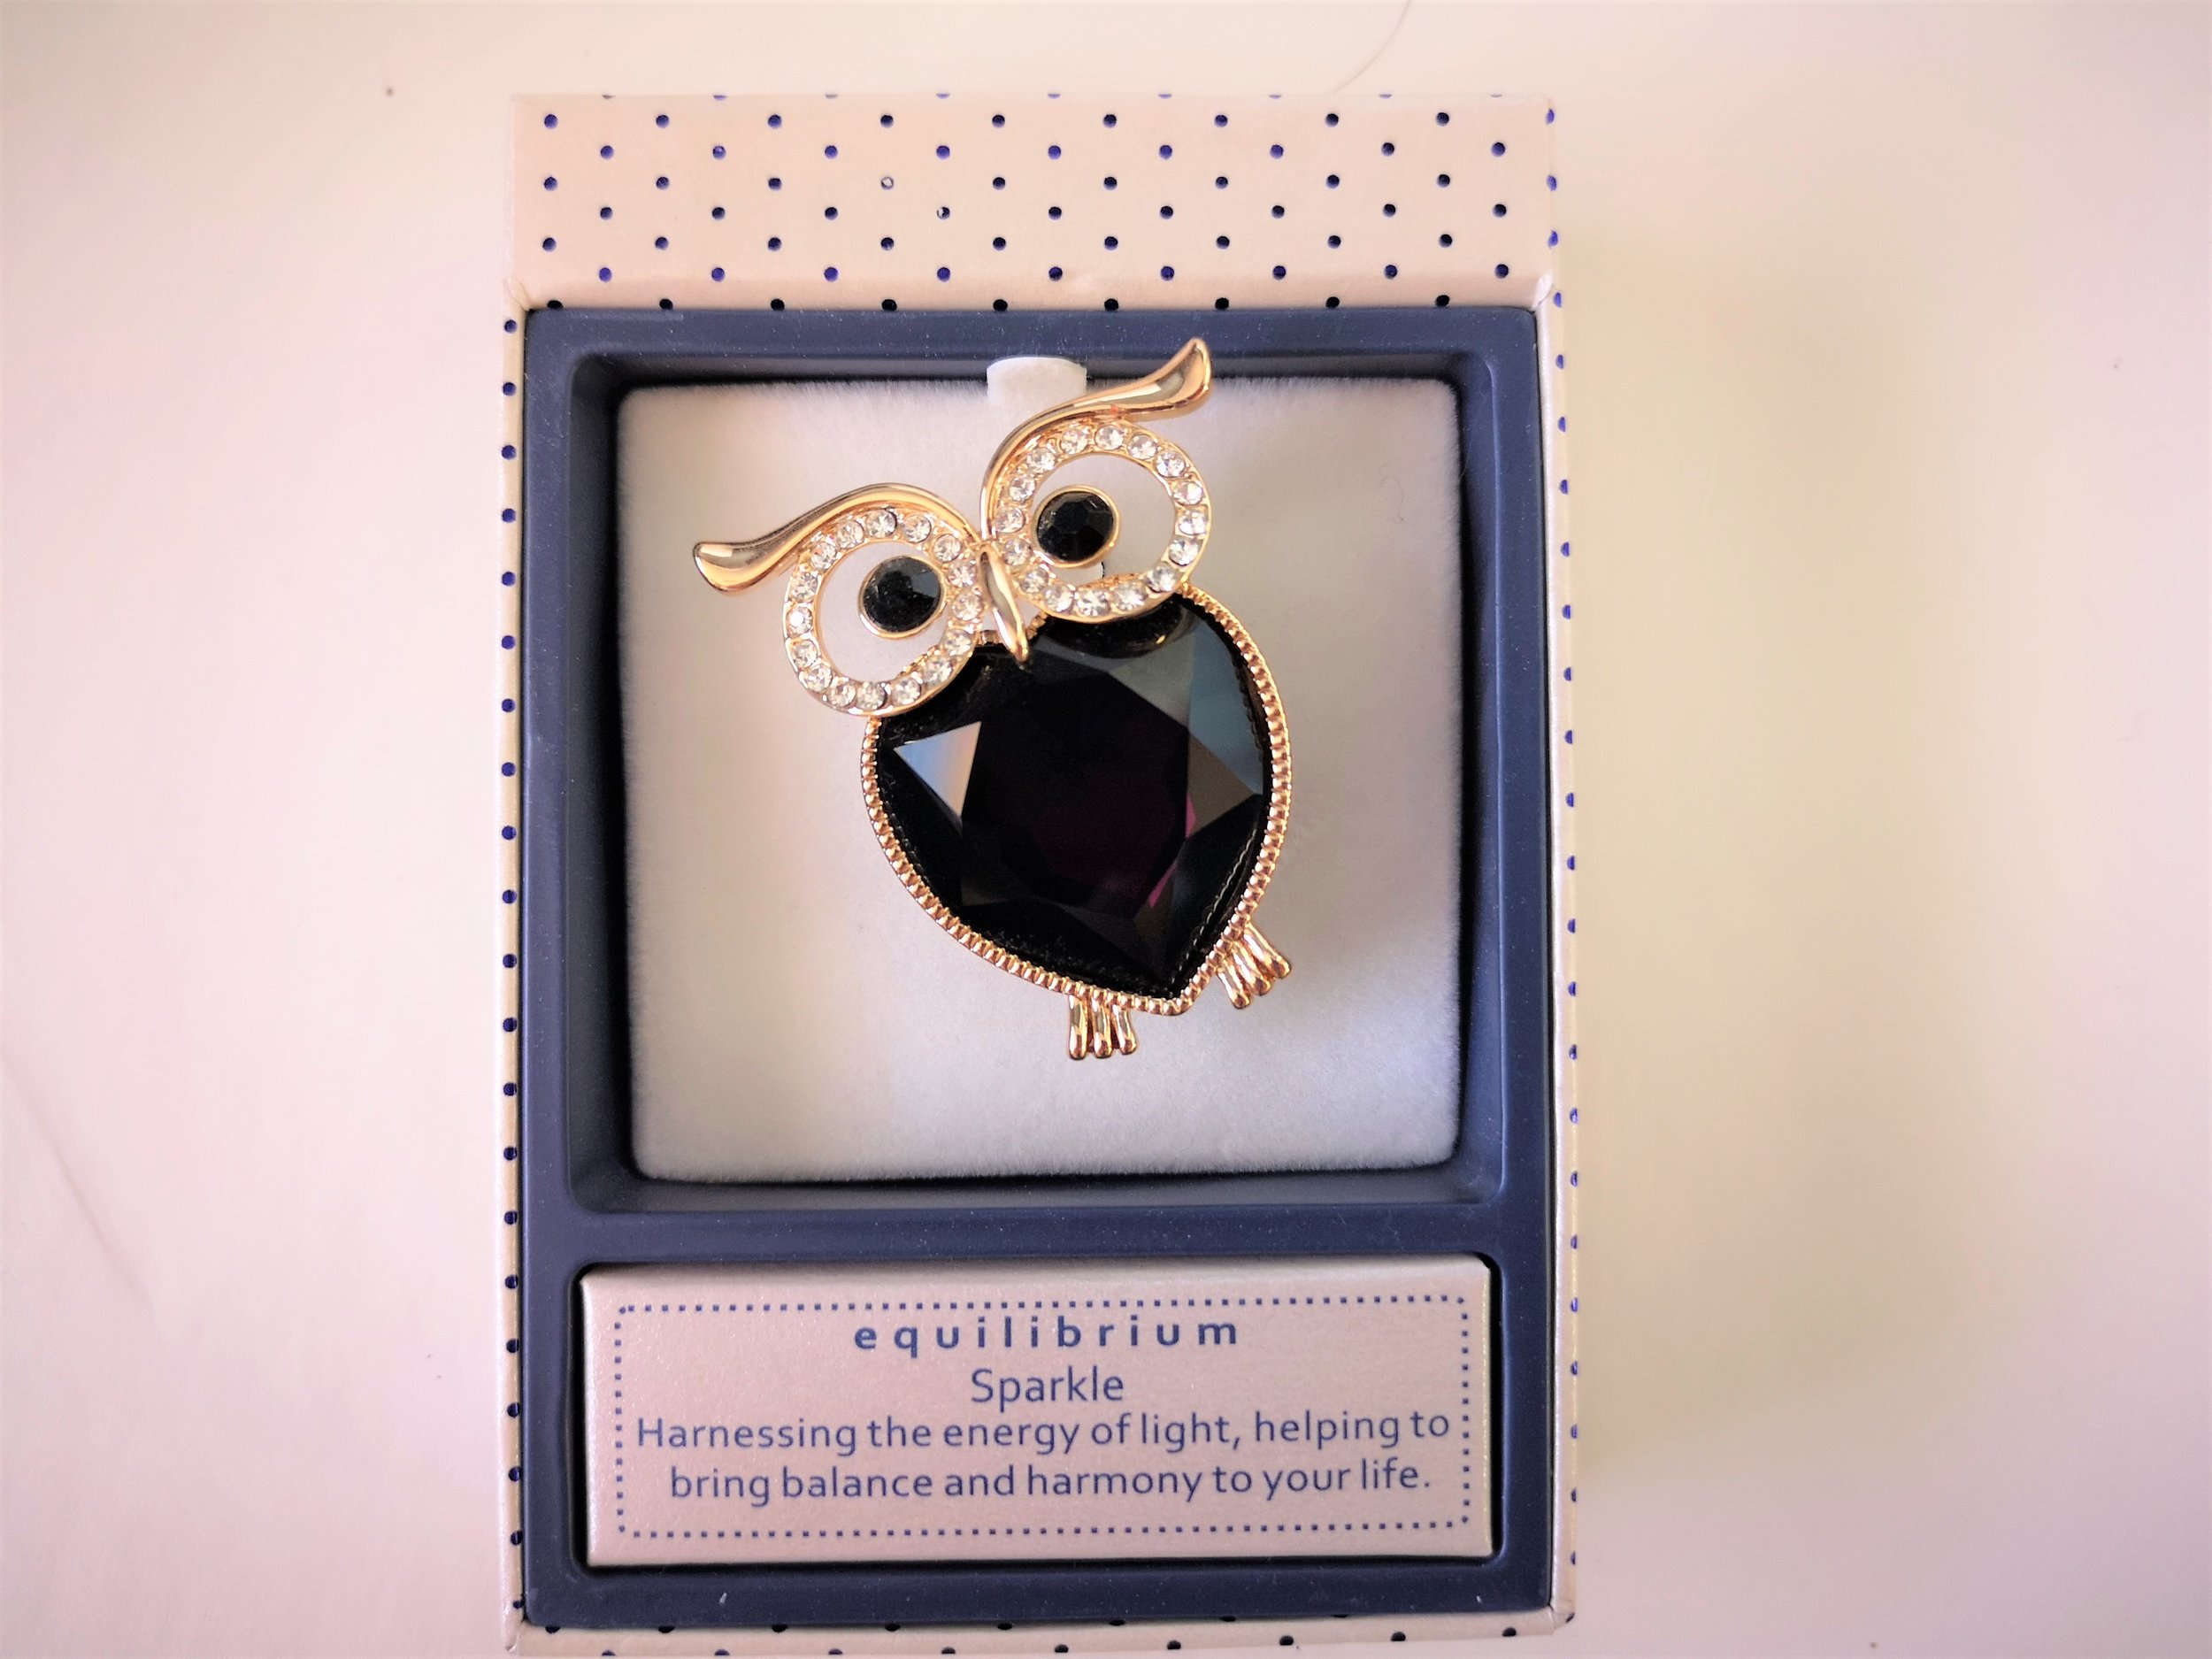 Equilibrium 'Crystal Owls' Collection — The Scottish Owl Shop